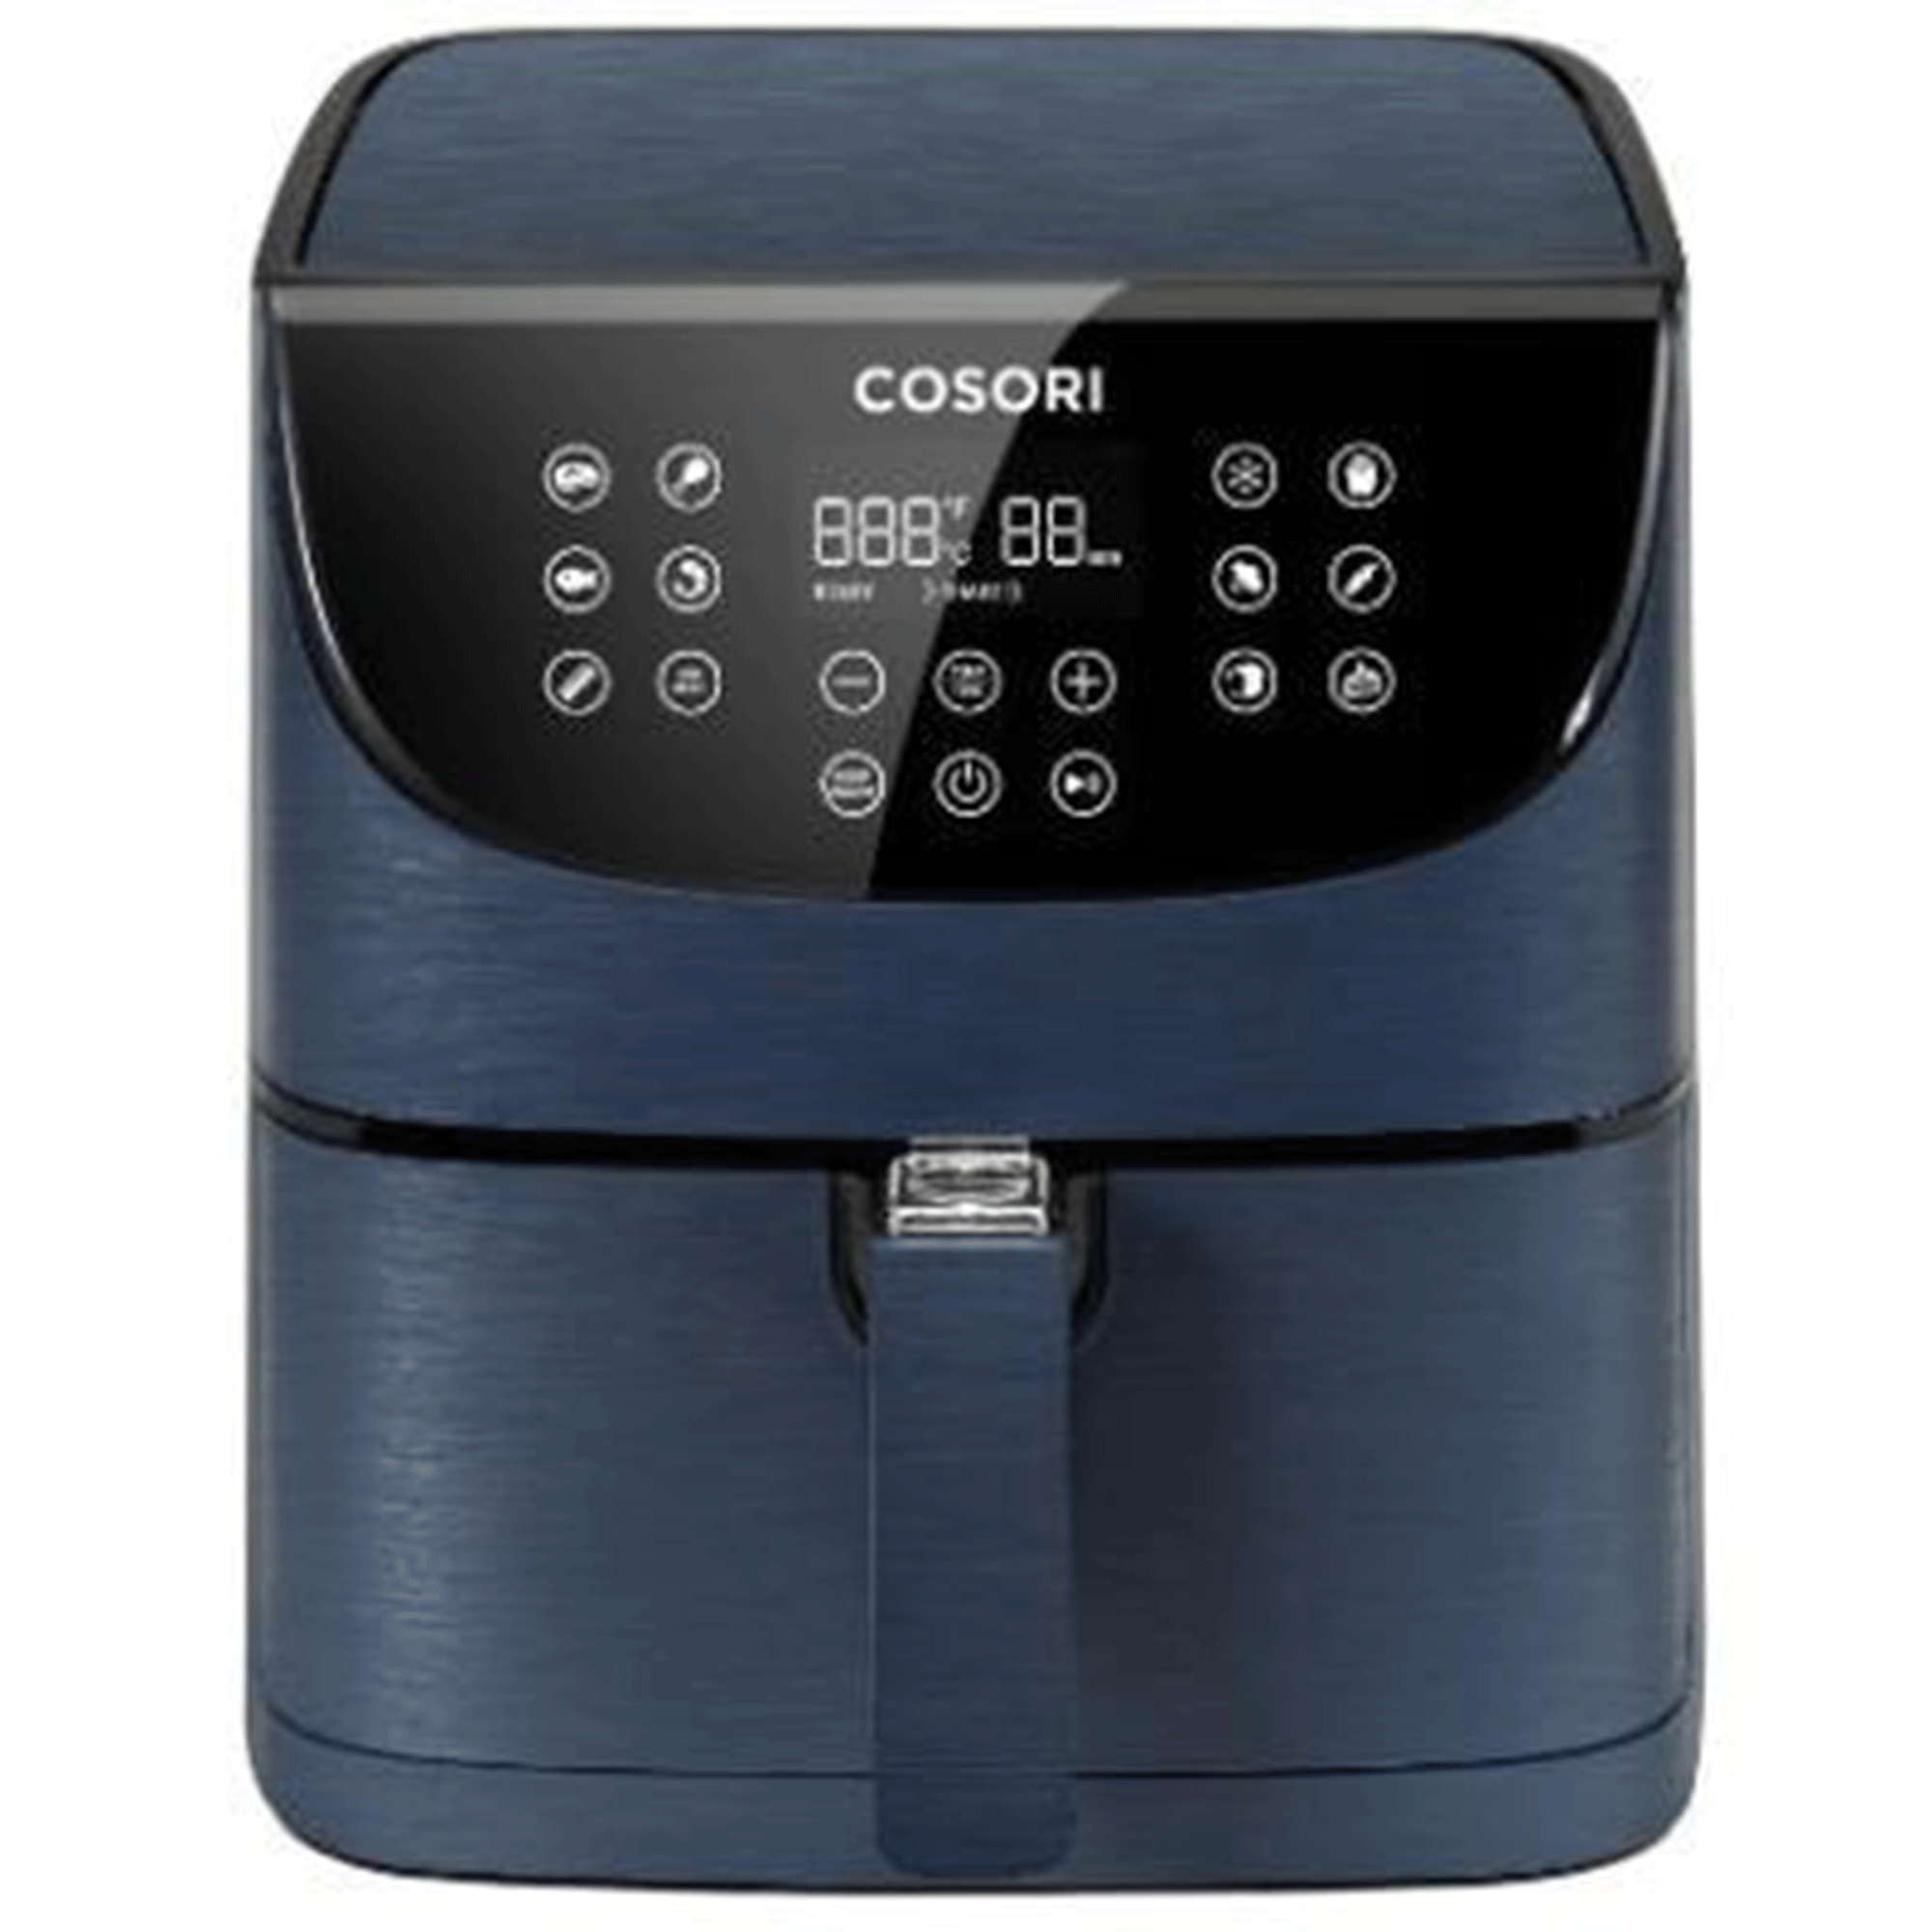 Cosori air fryer for recall